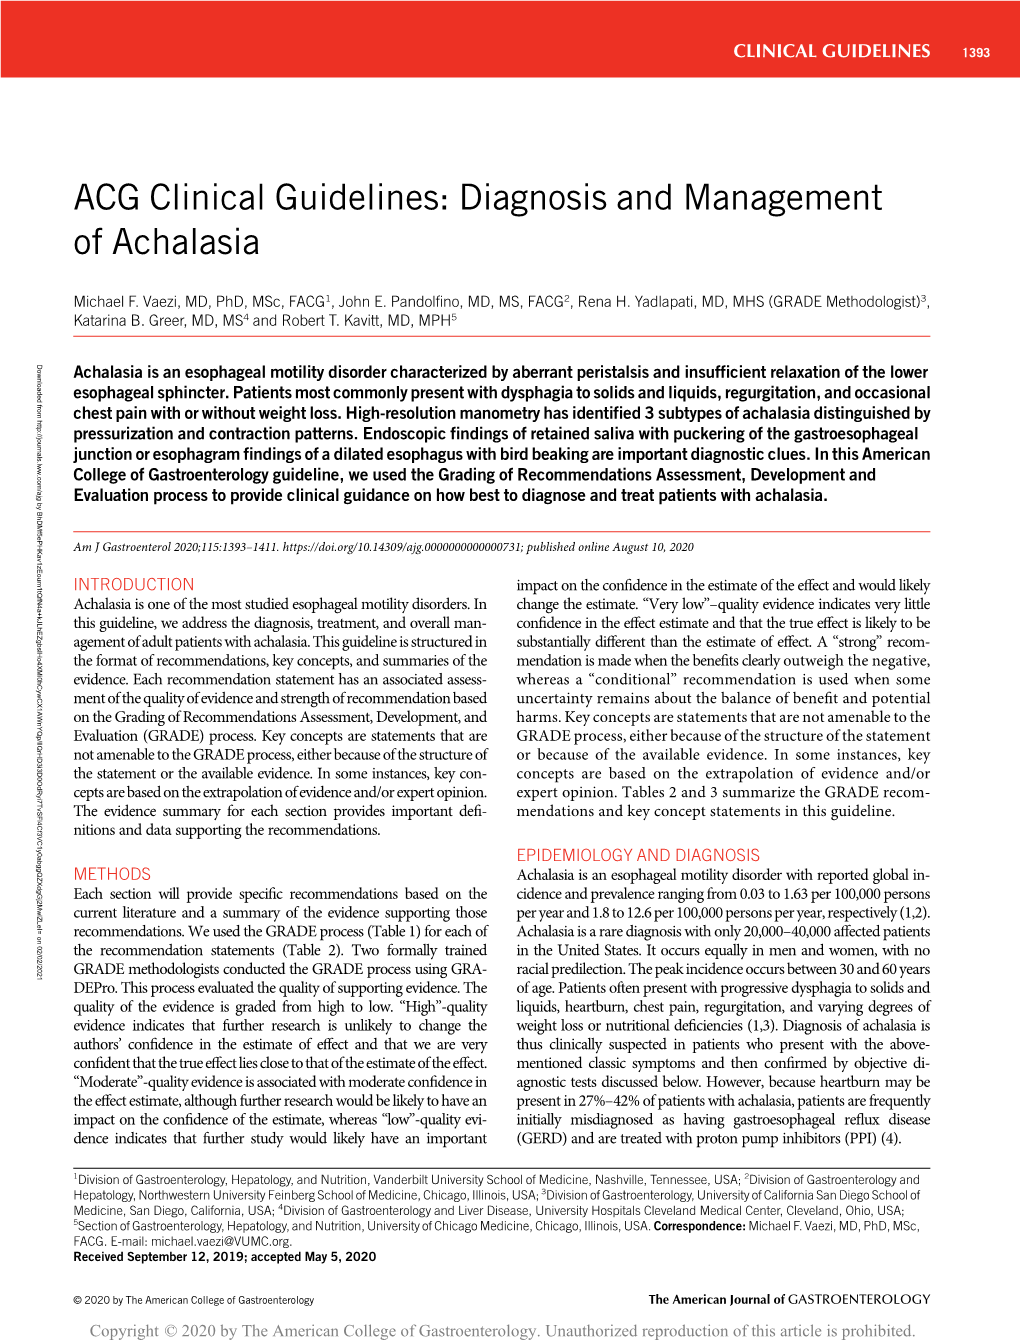 ACG Clinical Guidelines: Diagnosis and Management of Achalasia